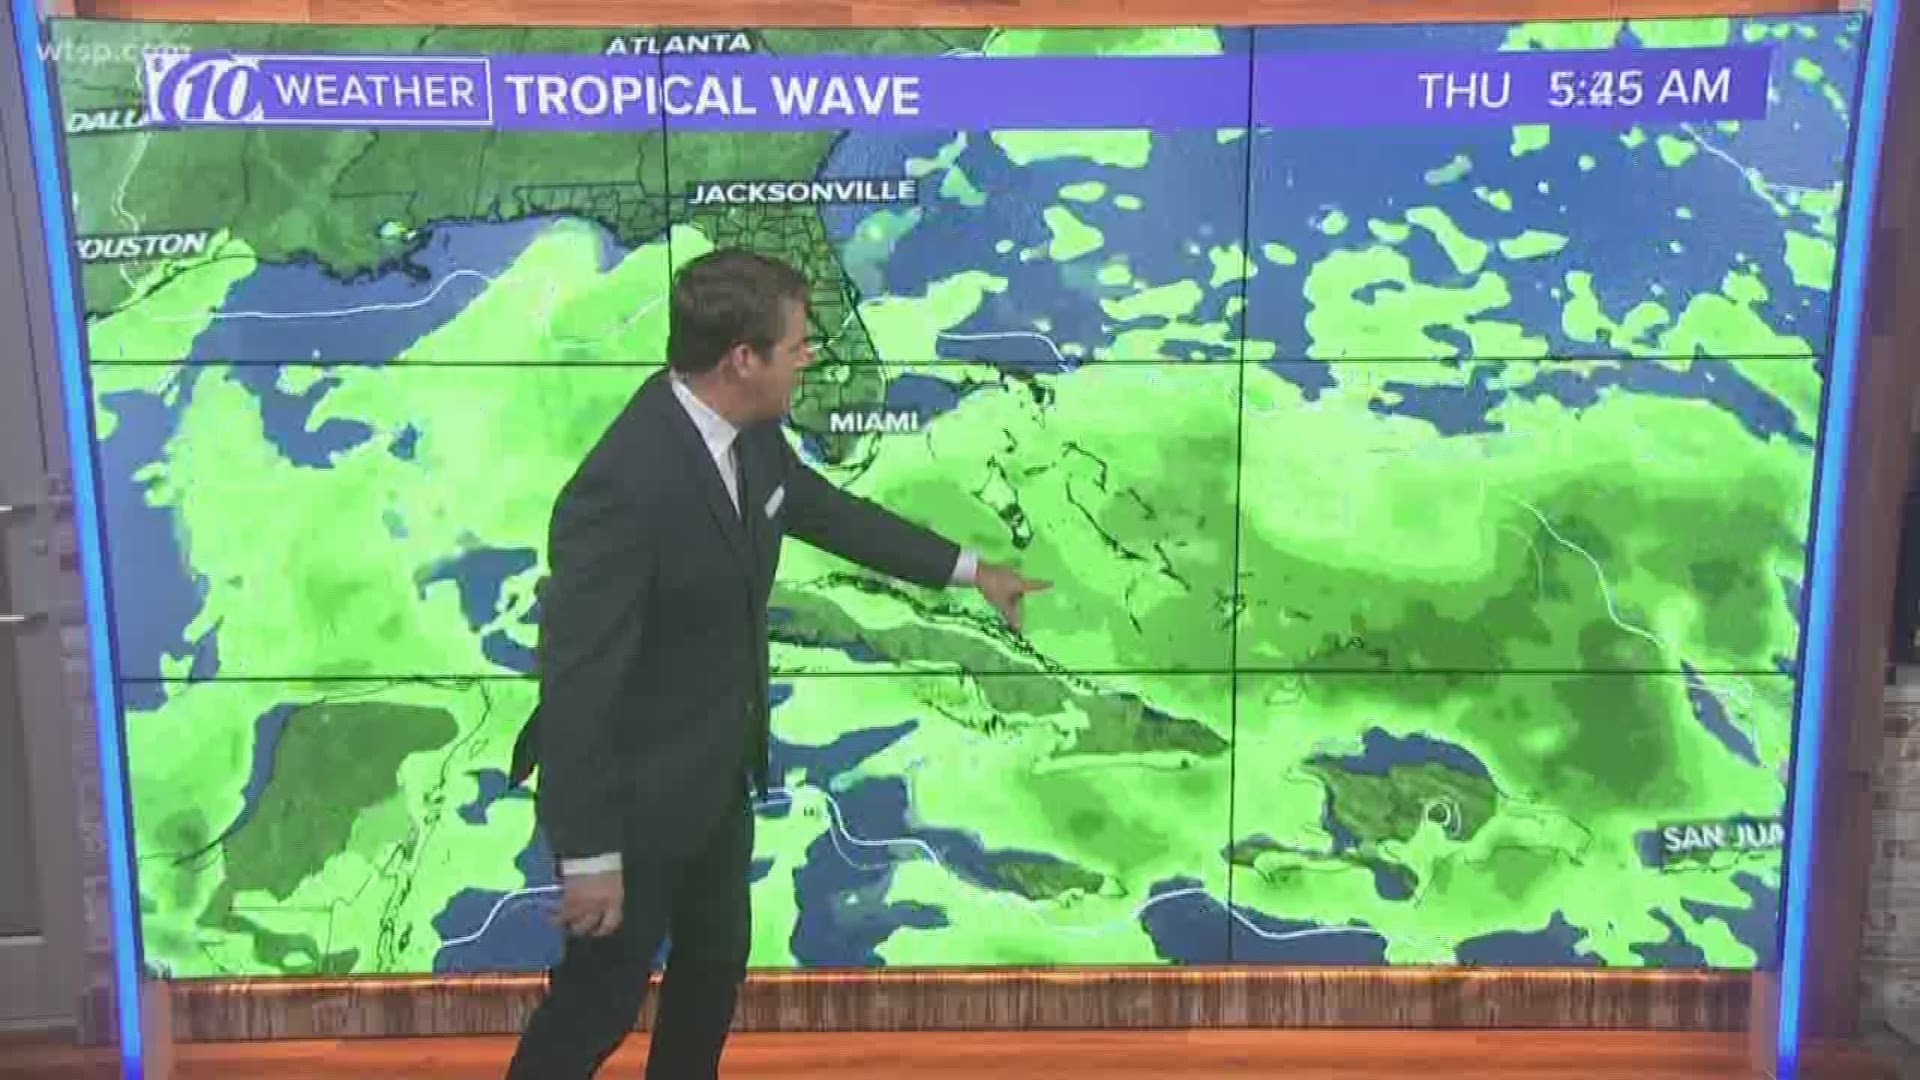 A tropical wave bubbling about the Caribbean could become a cyclone in the coming days and potentially impact Florida.

The National Hurricane Center and the 10News weather team are carefully monitoring an area of showers and storms associated with a tropical wave in the eastern Caribbean Sea. As it moves westward, it will come in contact with parts of Puerto Rico and Hispaniola.